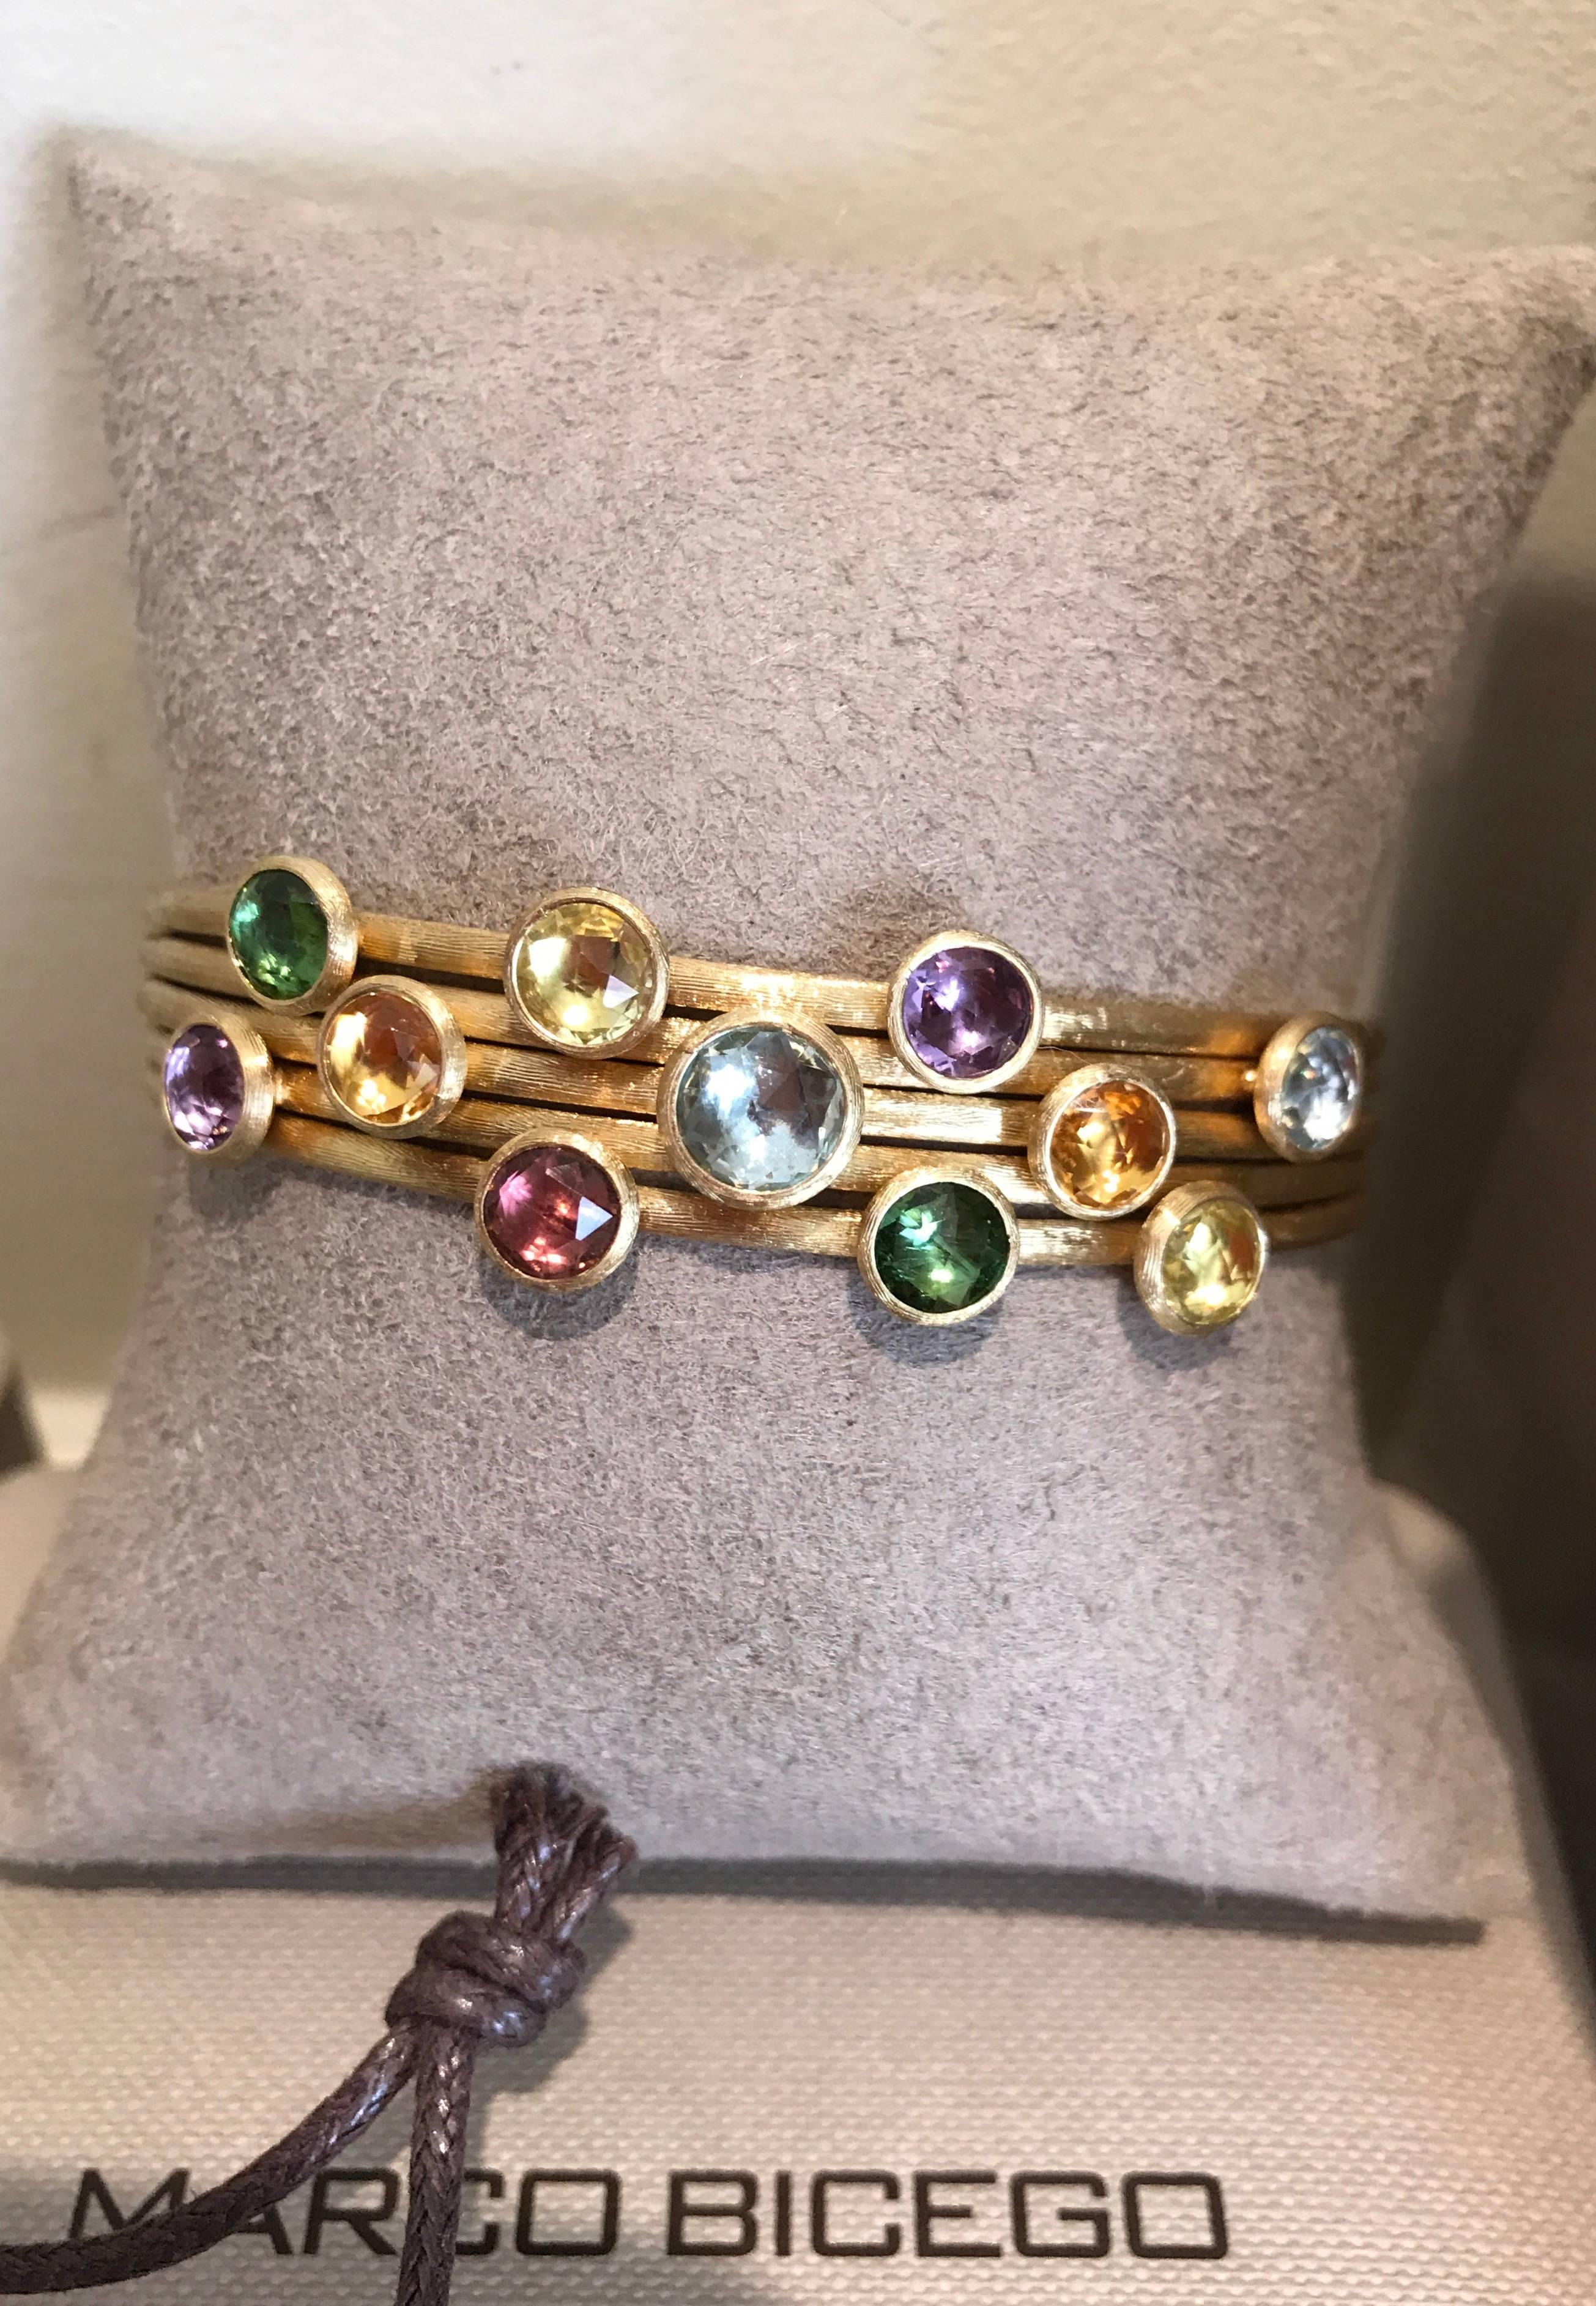 A Marco Bicego Jaipur five strand mixed stone cuff set in 18k yellow gold. The Jaipur bracelet features mixed semi precious gemstones mixed tourmaline; mixed quartz; beryl and garnet set to a hand engraved cuff. 
Retail price £3977
Measurements: